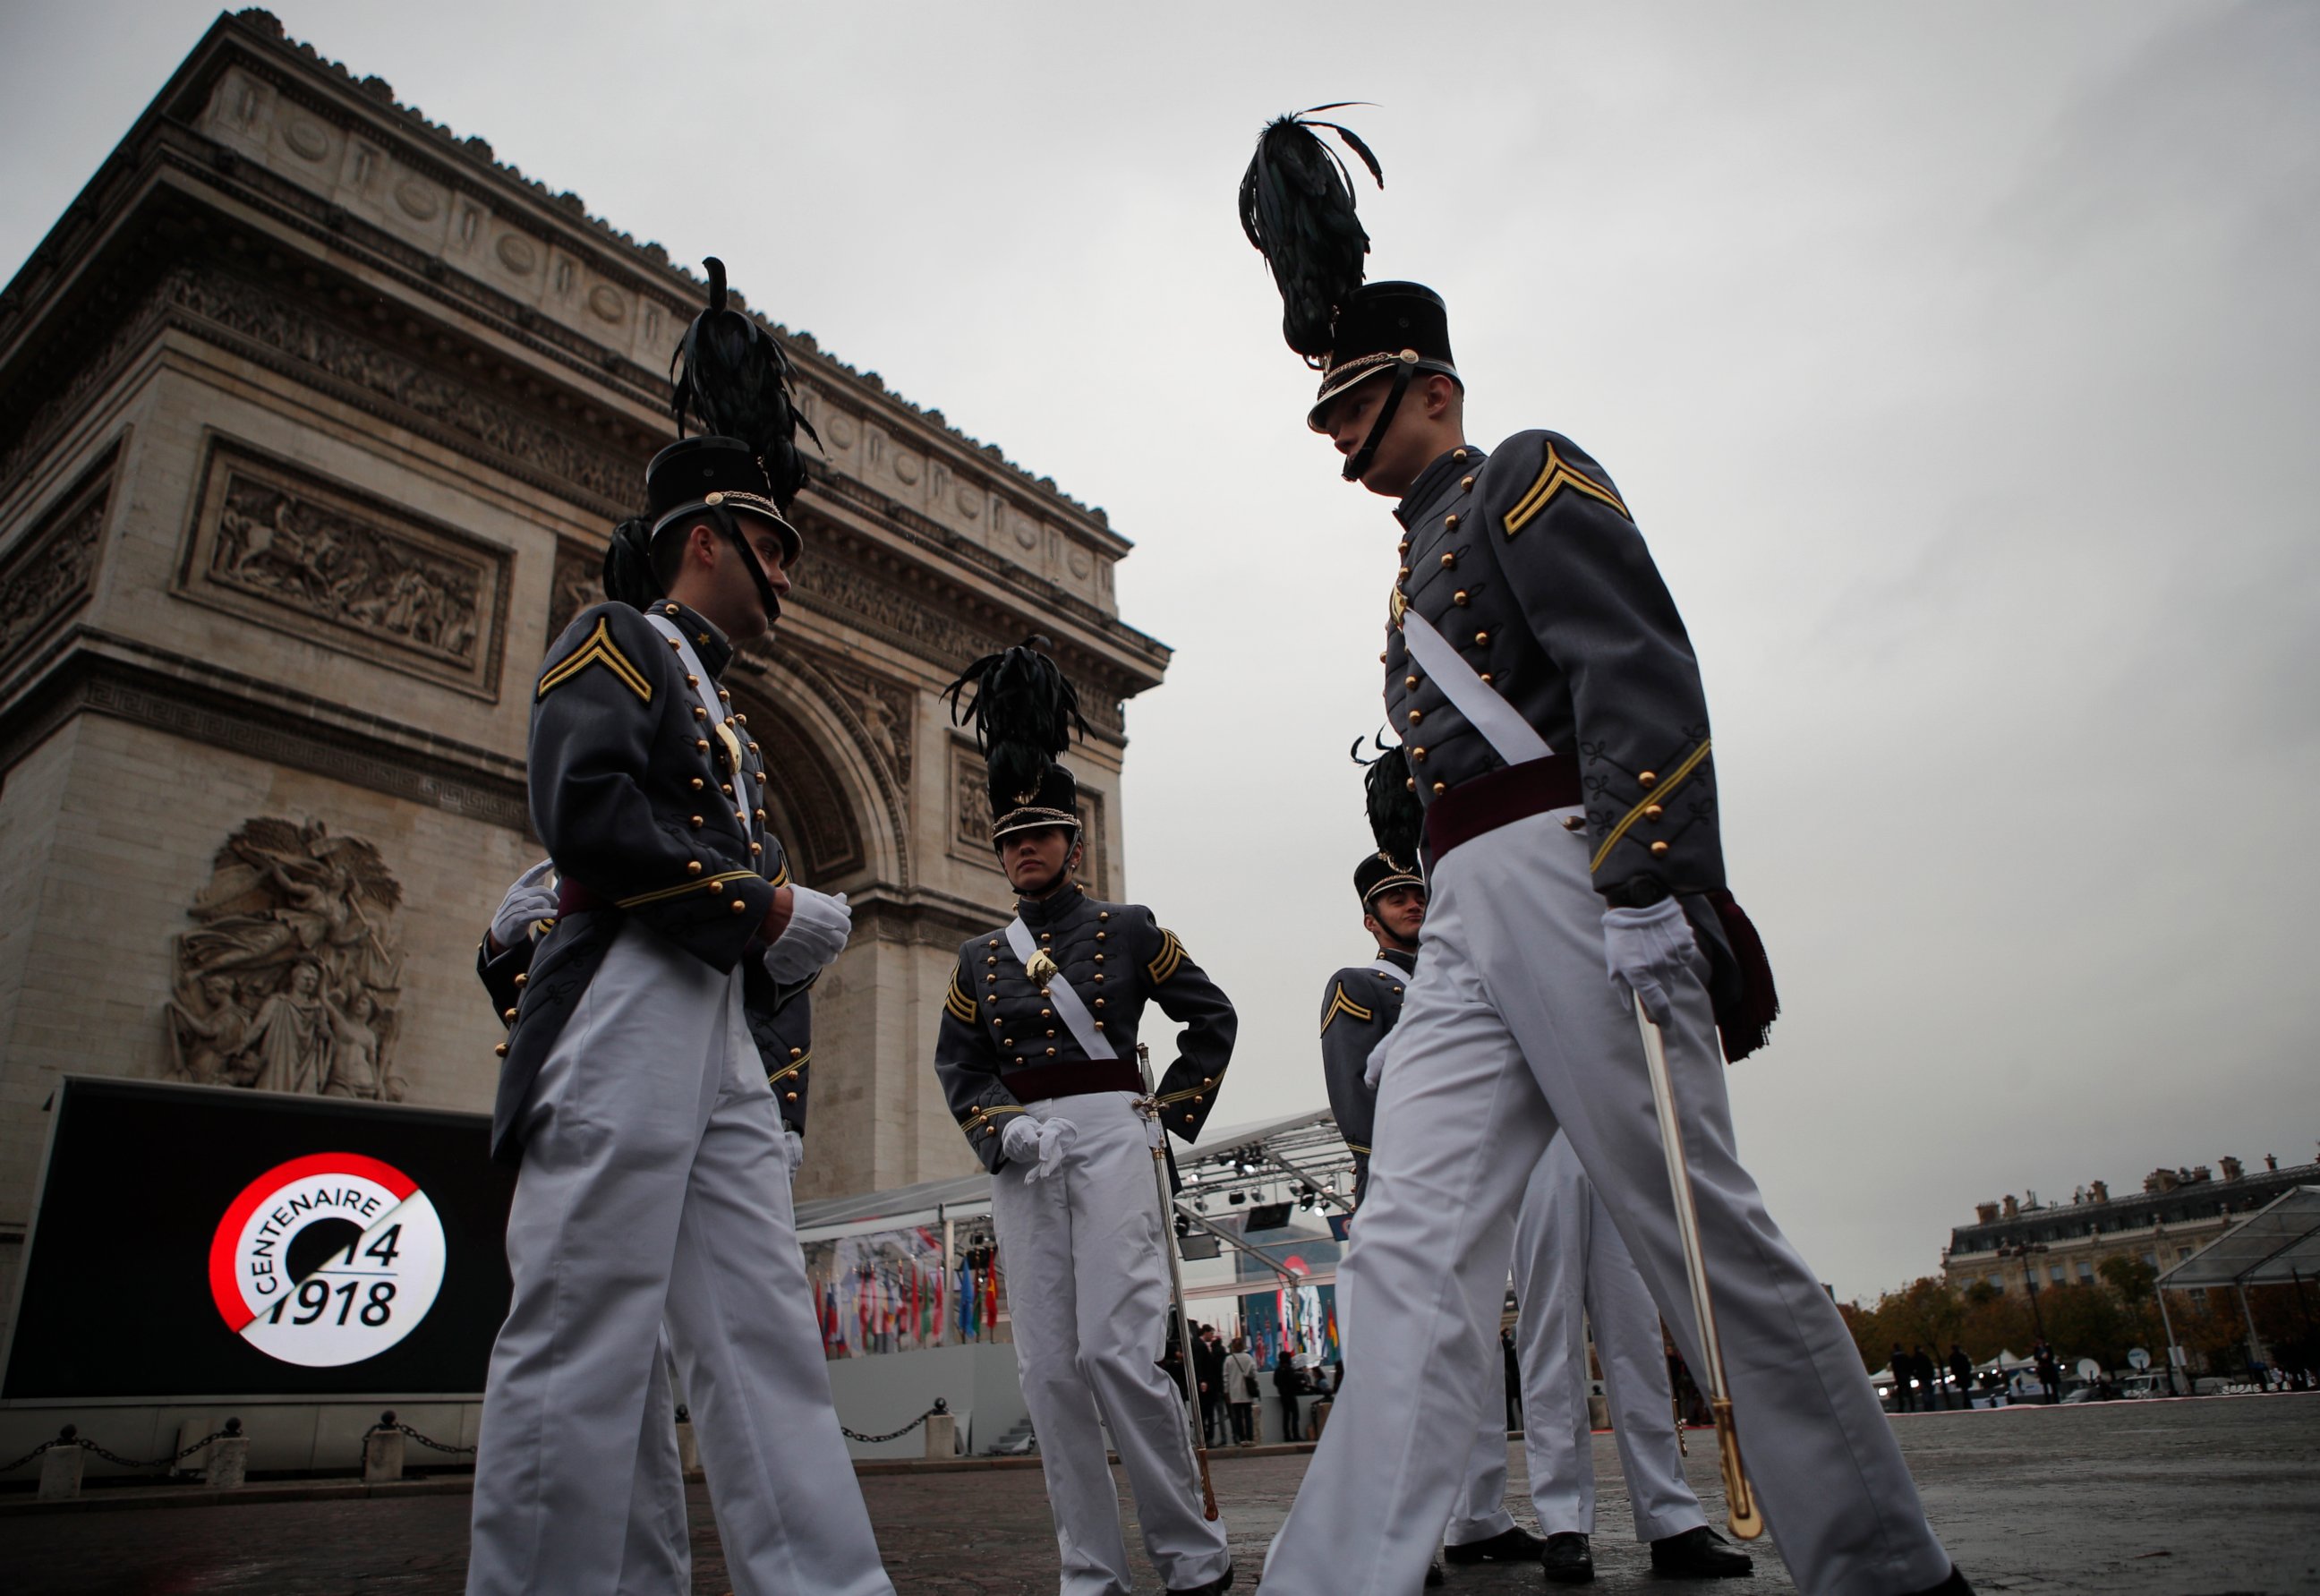 PHOTO: Cadets form the New York military academy wait near the Arc de Triomphe Sunday, Nov. 11, 2018 in Paris. More than 60 heads of state and government are in France for the Armistice ceremonies at the Tomb of the Unknown Soldier in Paris.